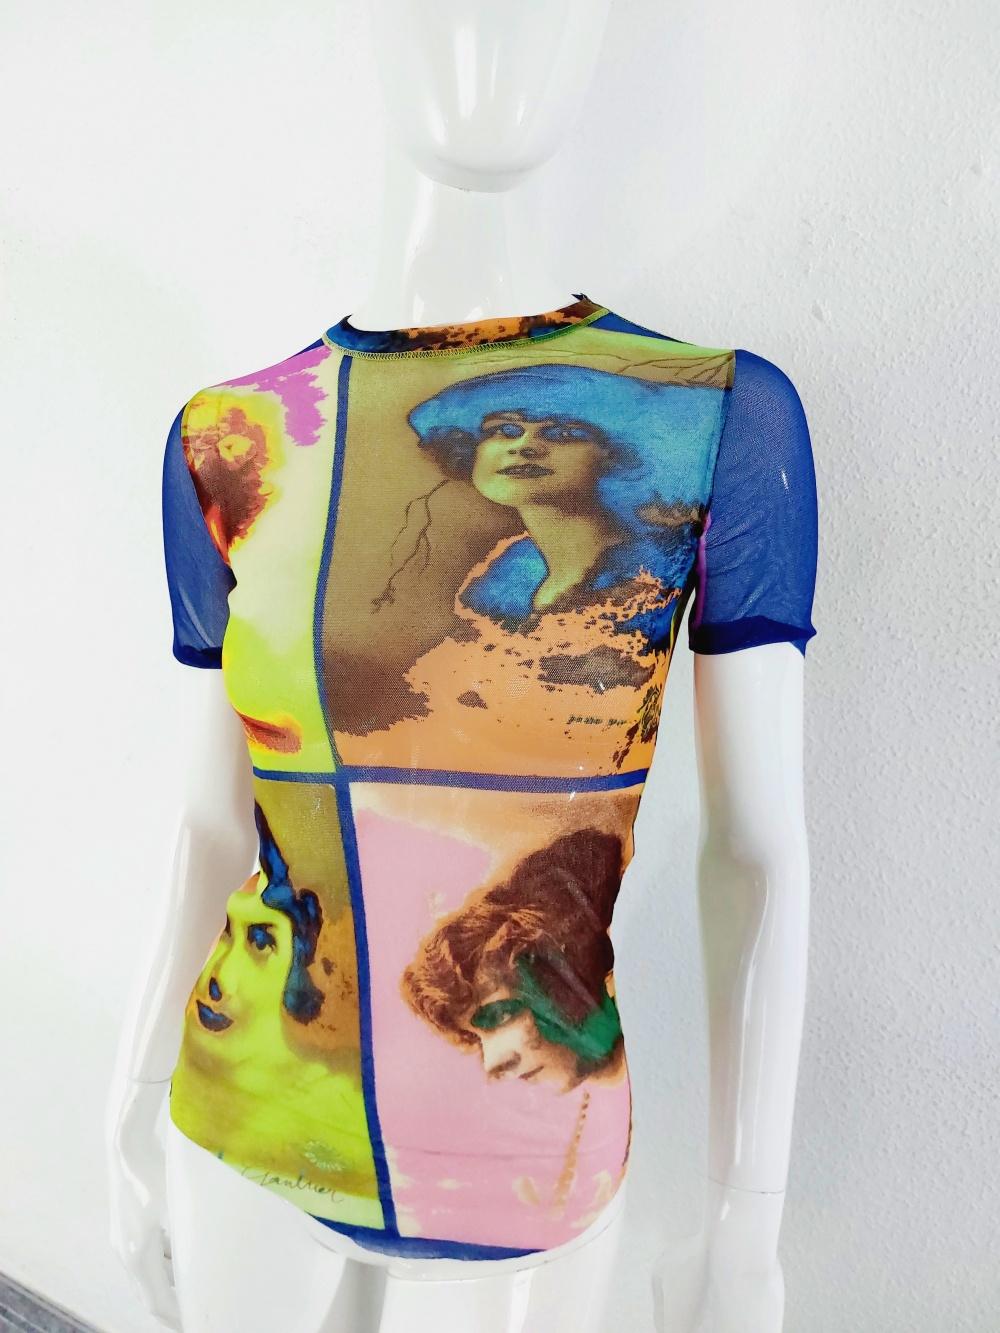 Jean Paul Gaultier Kylie Jenner Kim Mesh Portrait Saturated Faces Top Shirt Tee In Excellent Condition For Sale In PARIS, FR